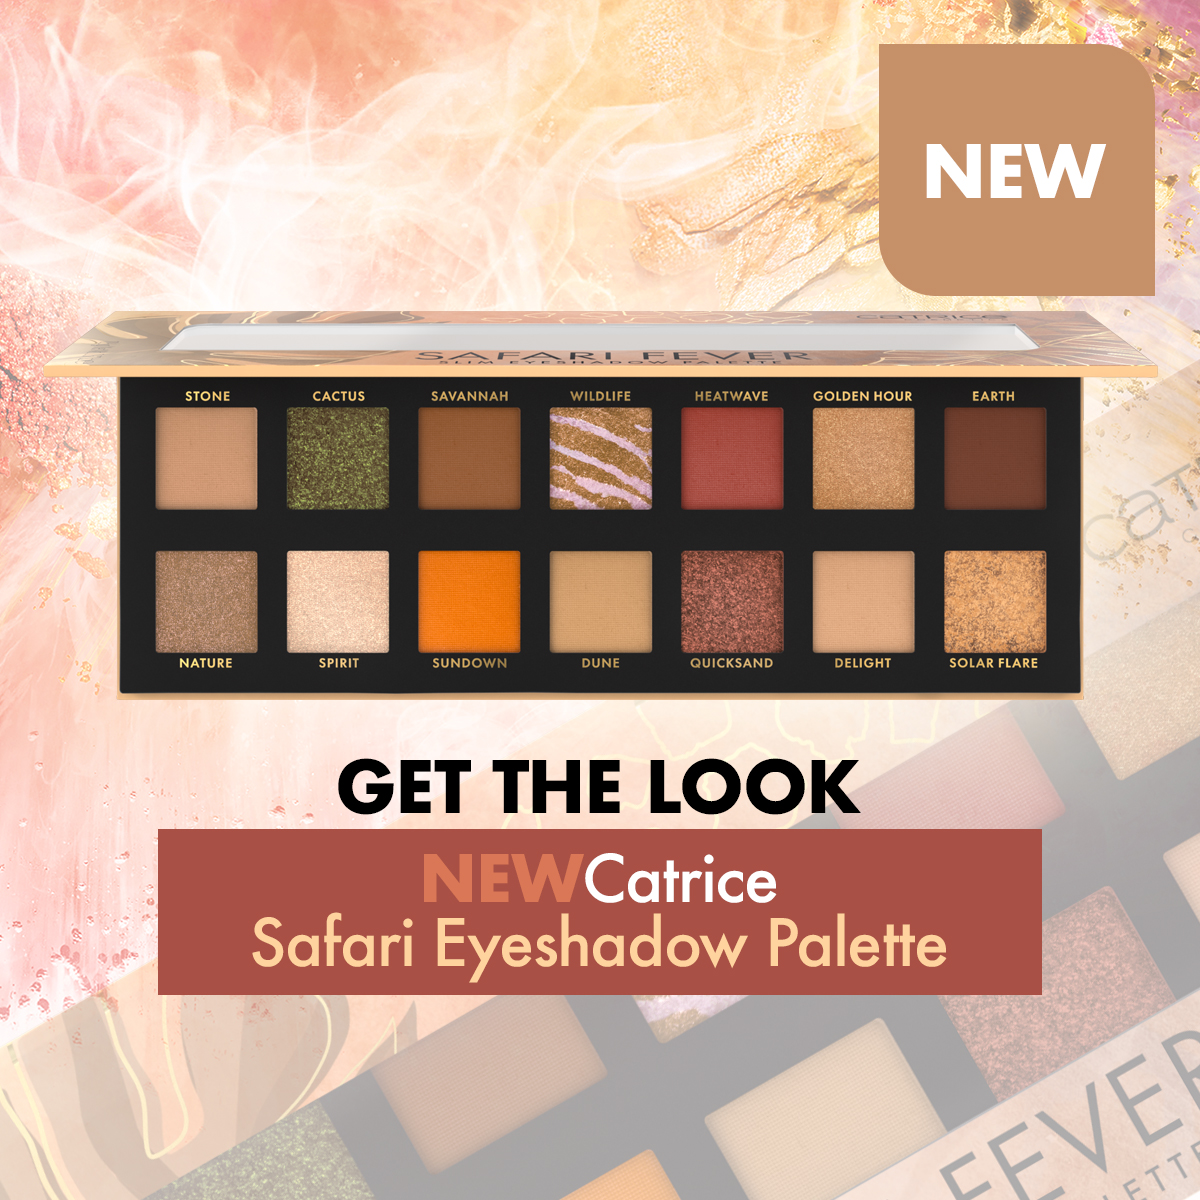 Perfect Autumn eyes using the NEW Safari Fever Slim Eyeshadow Palette 🤩🎨 This palette includes 14 highly-pigmented shades in vibrant metallic, smooth shimmer, and velvety matte formulas. Grab it today @Dischem 🛒